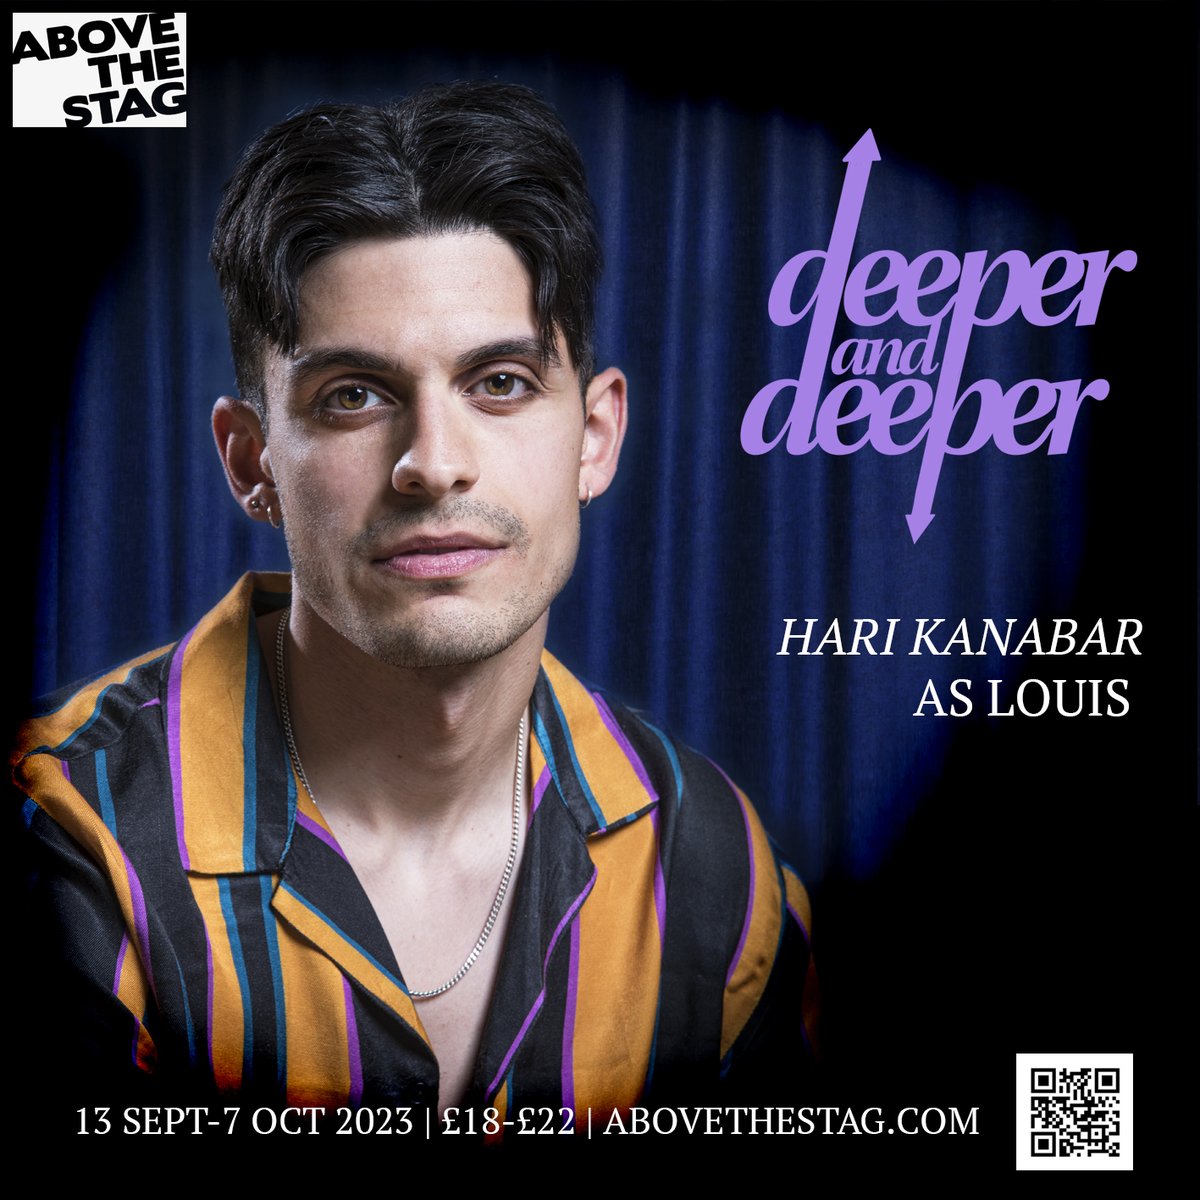 As we enter our second week of rehearsals for Deeper and Deeper - we welcome to our cast Hari Kanabar as Louis! Only a hundred seats left for our run! Abovethestag.com